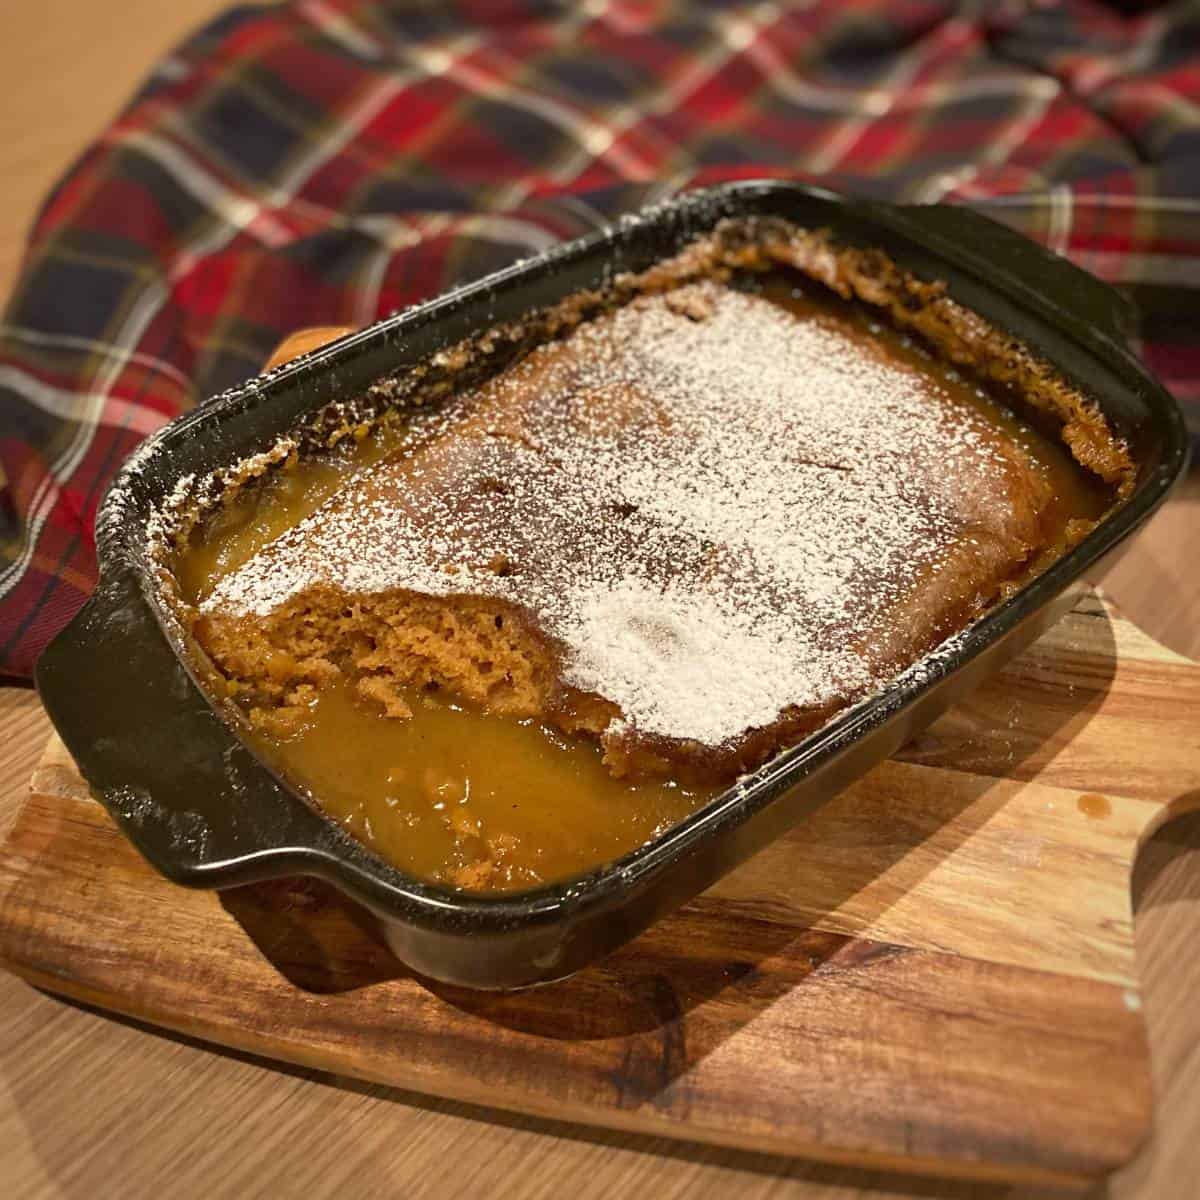 Gingerbread pudding sitting in the dish it was cooked in on top of a wooden chopping board